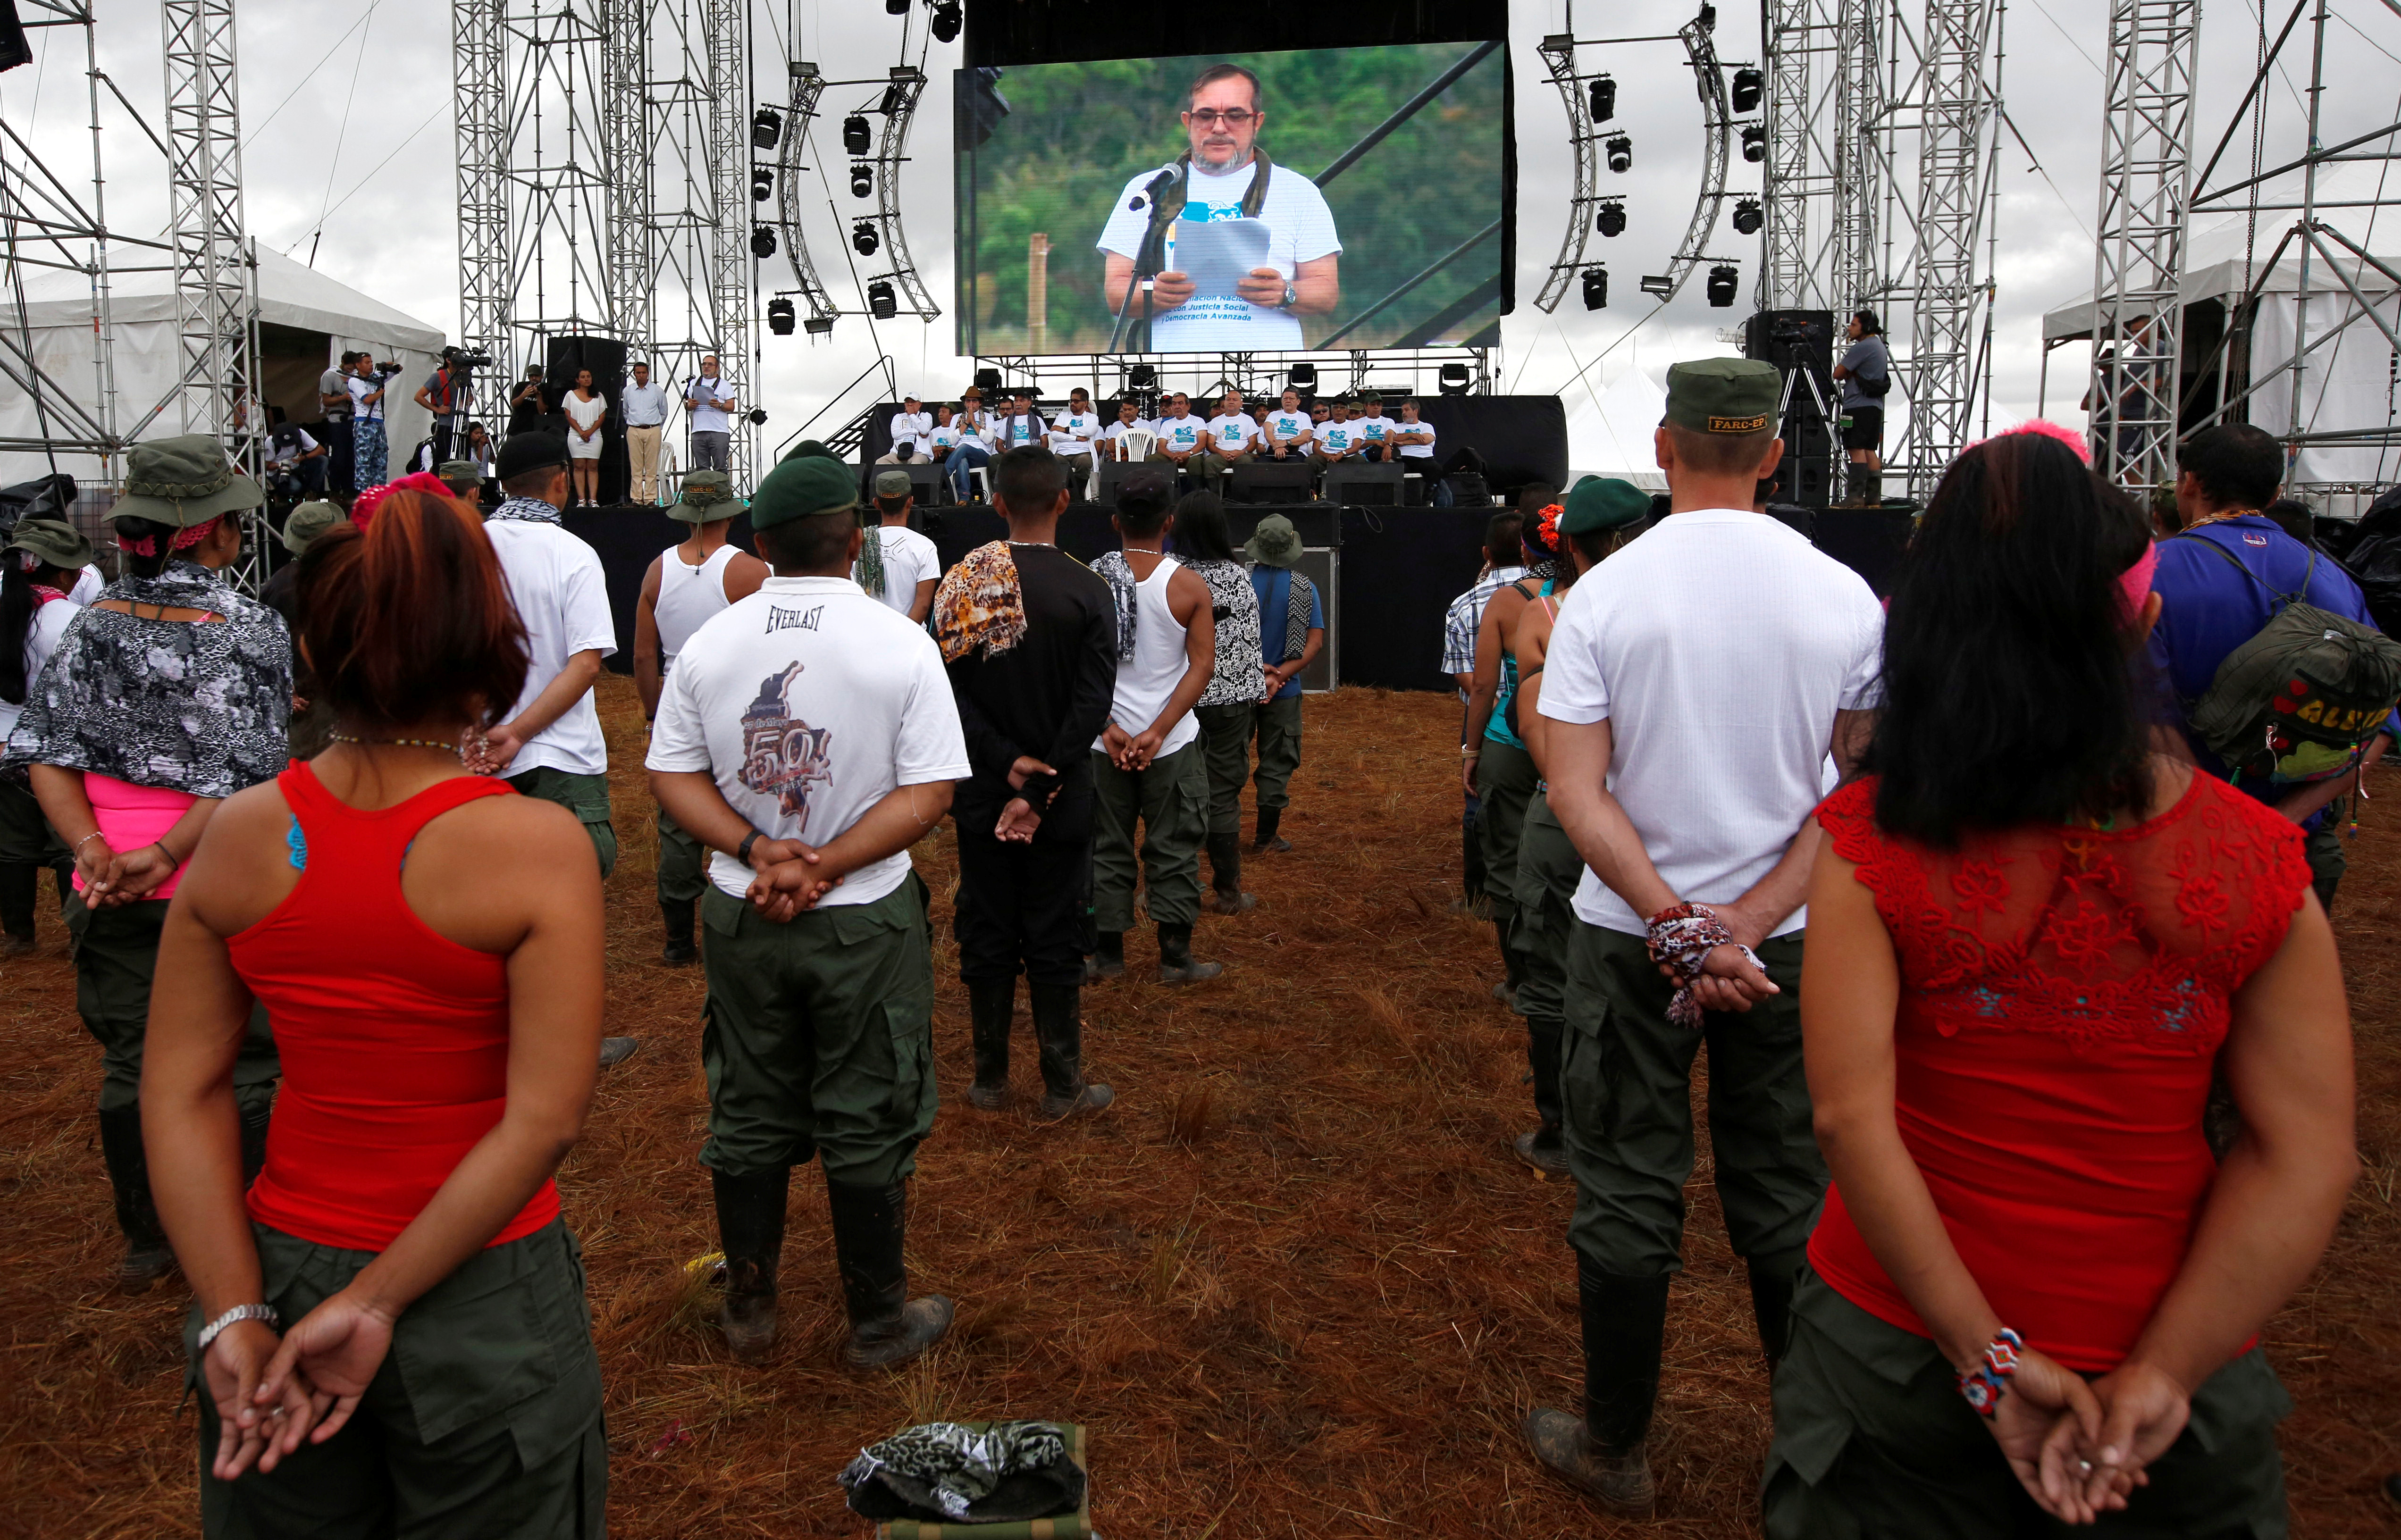 FARC rebel leader Rodrigo Londono, better known as Timochenko, is seen on a screen during the opening ceremony of the group’s congress at the camp where they prepare for ratifying a peace deal with the government, in Yari Plains, Colombia, on September 17, 2016. Source: John Vizcaino/Reuters.